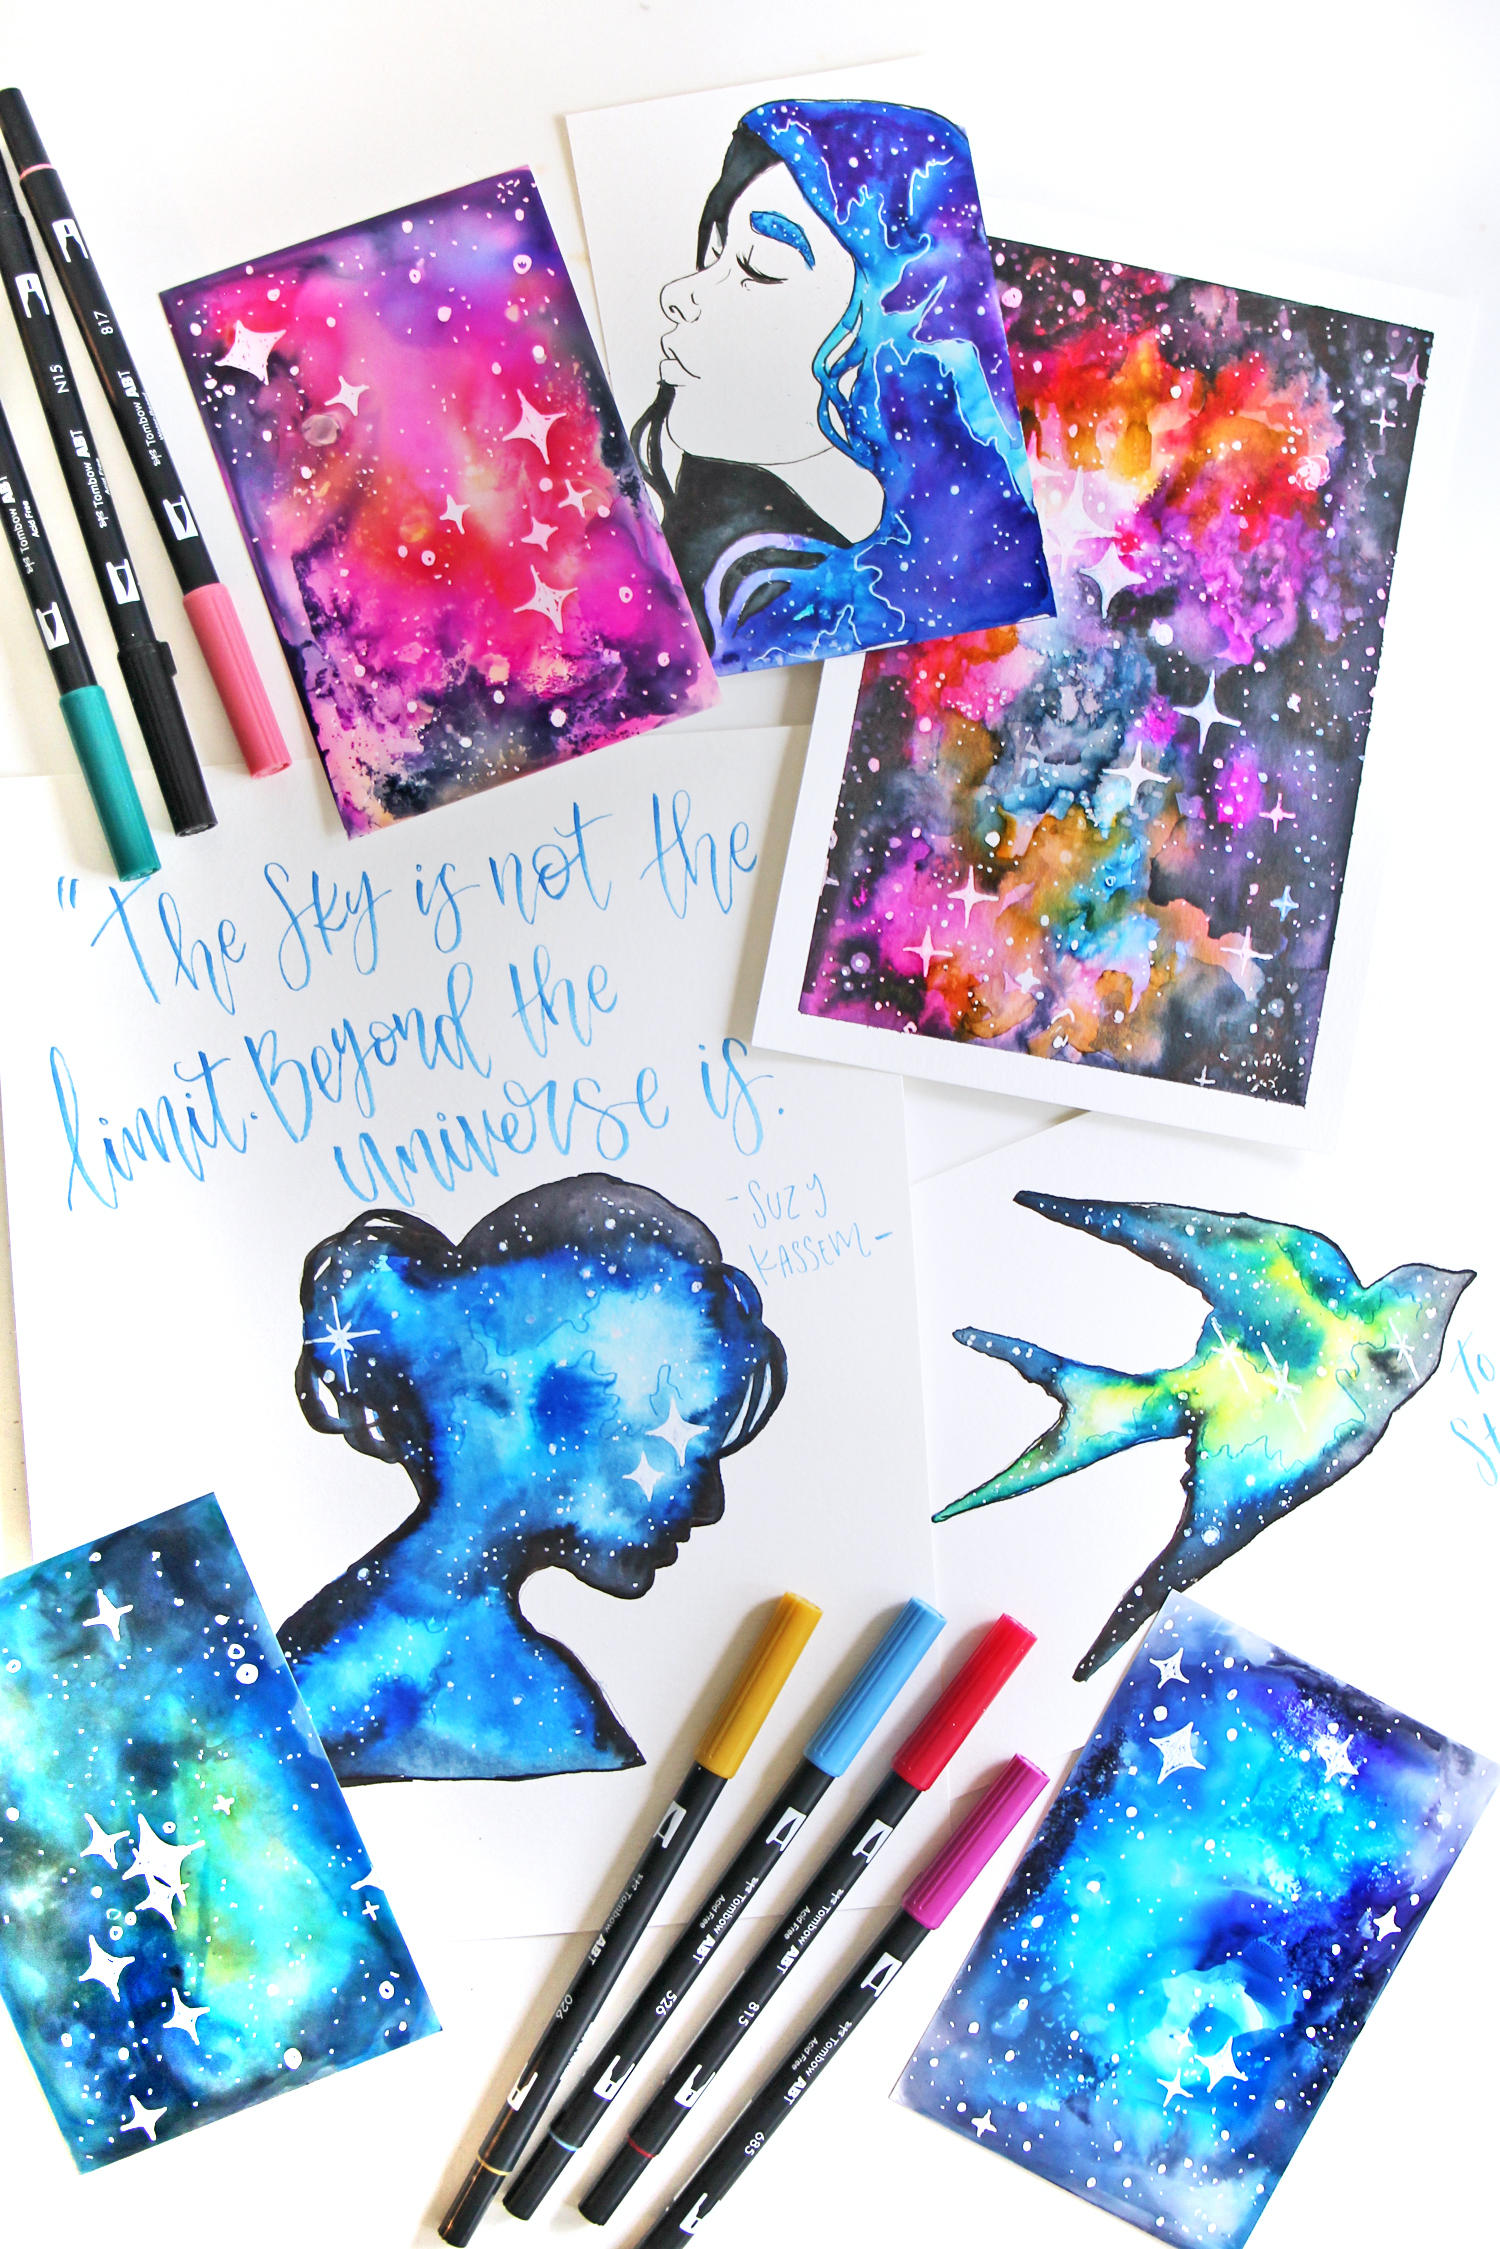 Your Guide to Painting Watercolor Galaxies Using Dual Brush Pens - Katie Smith 